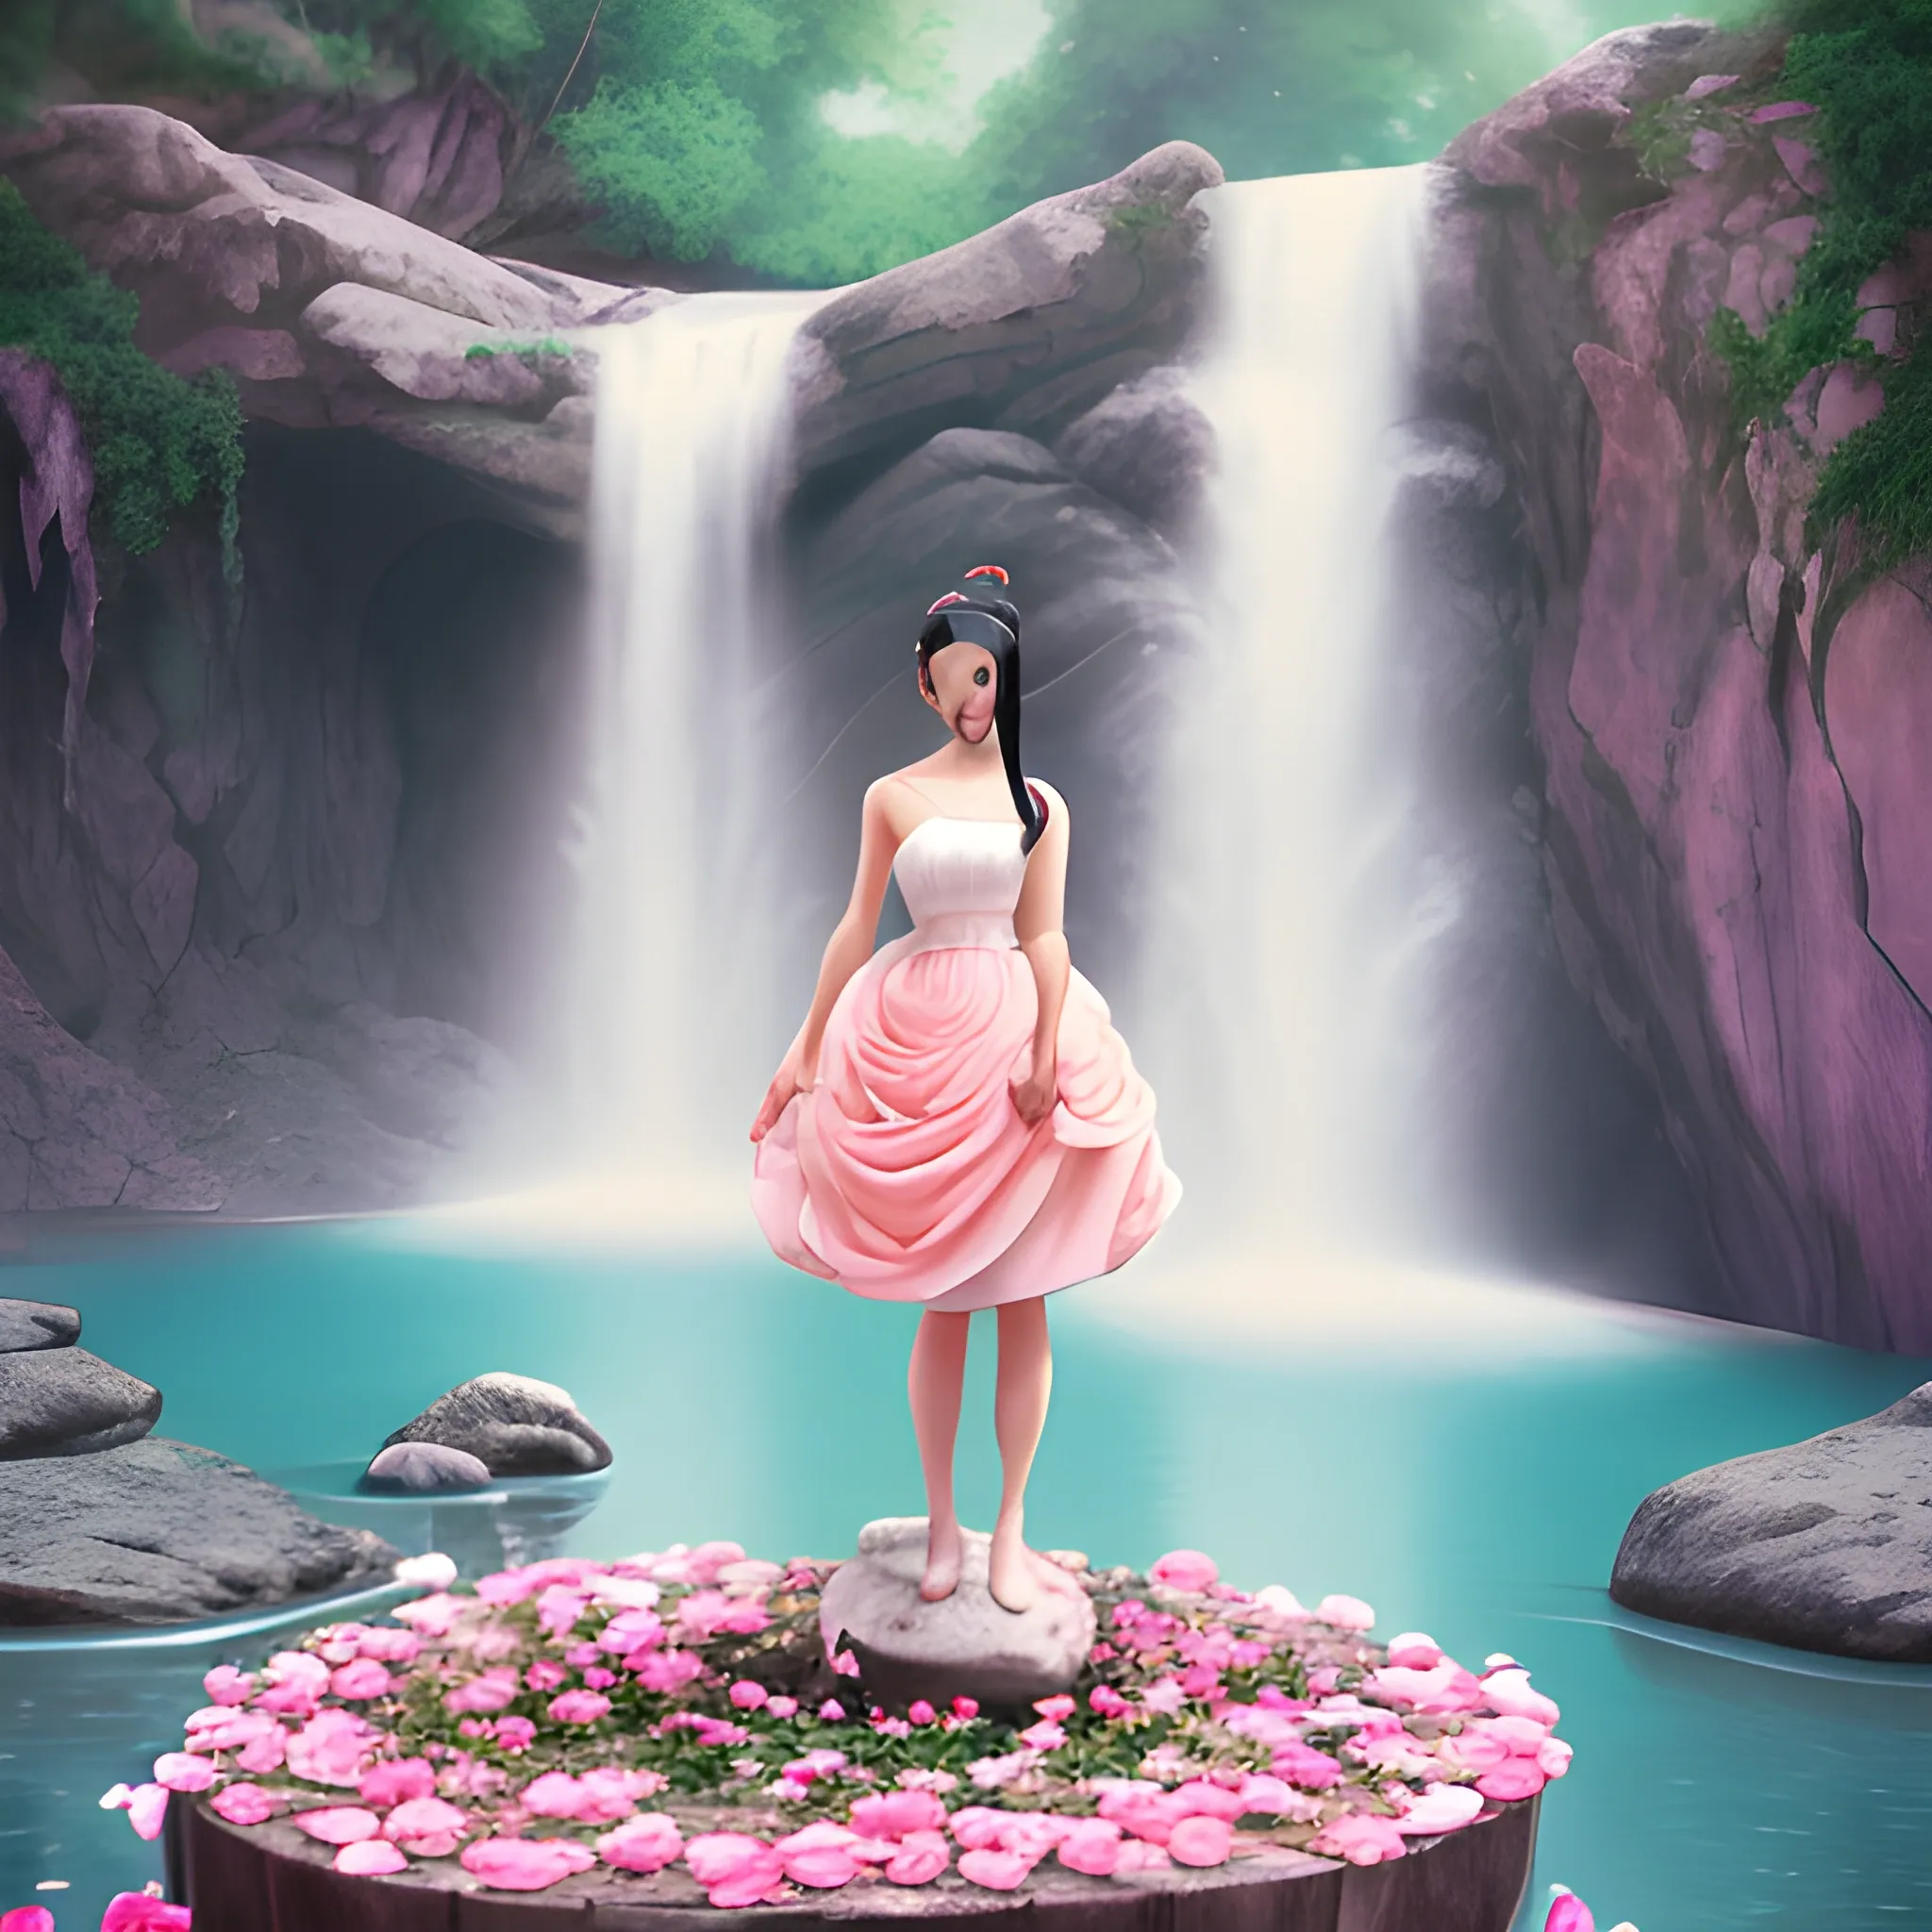 Very beautiful woman, black hair, bun hair, white dress, standing on stone, pink roses, light blue and pink, romanticism, high detail, 8K resolution, ultra high definition picture, red dress, waterfall background